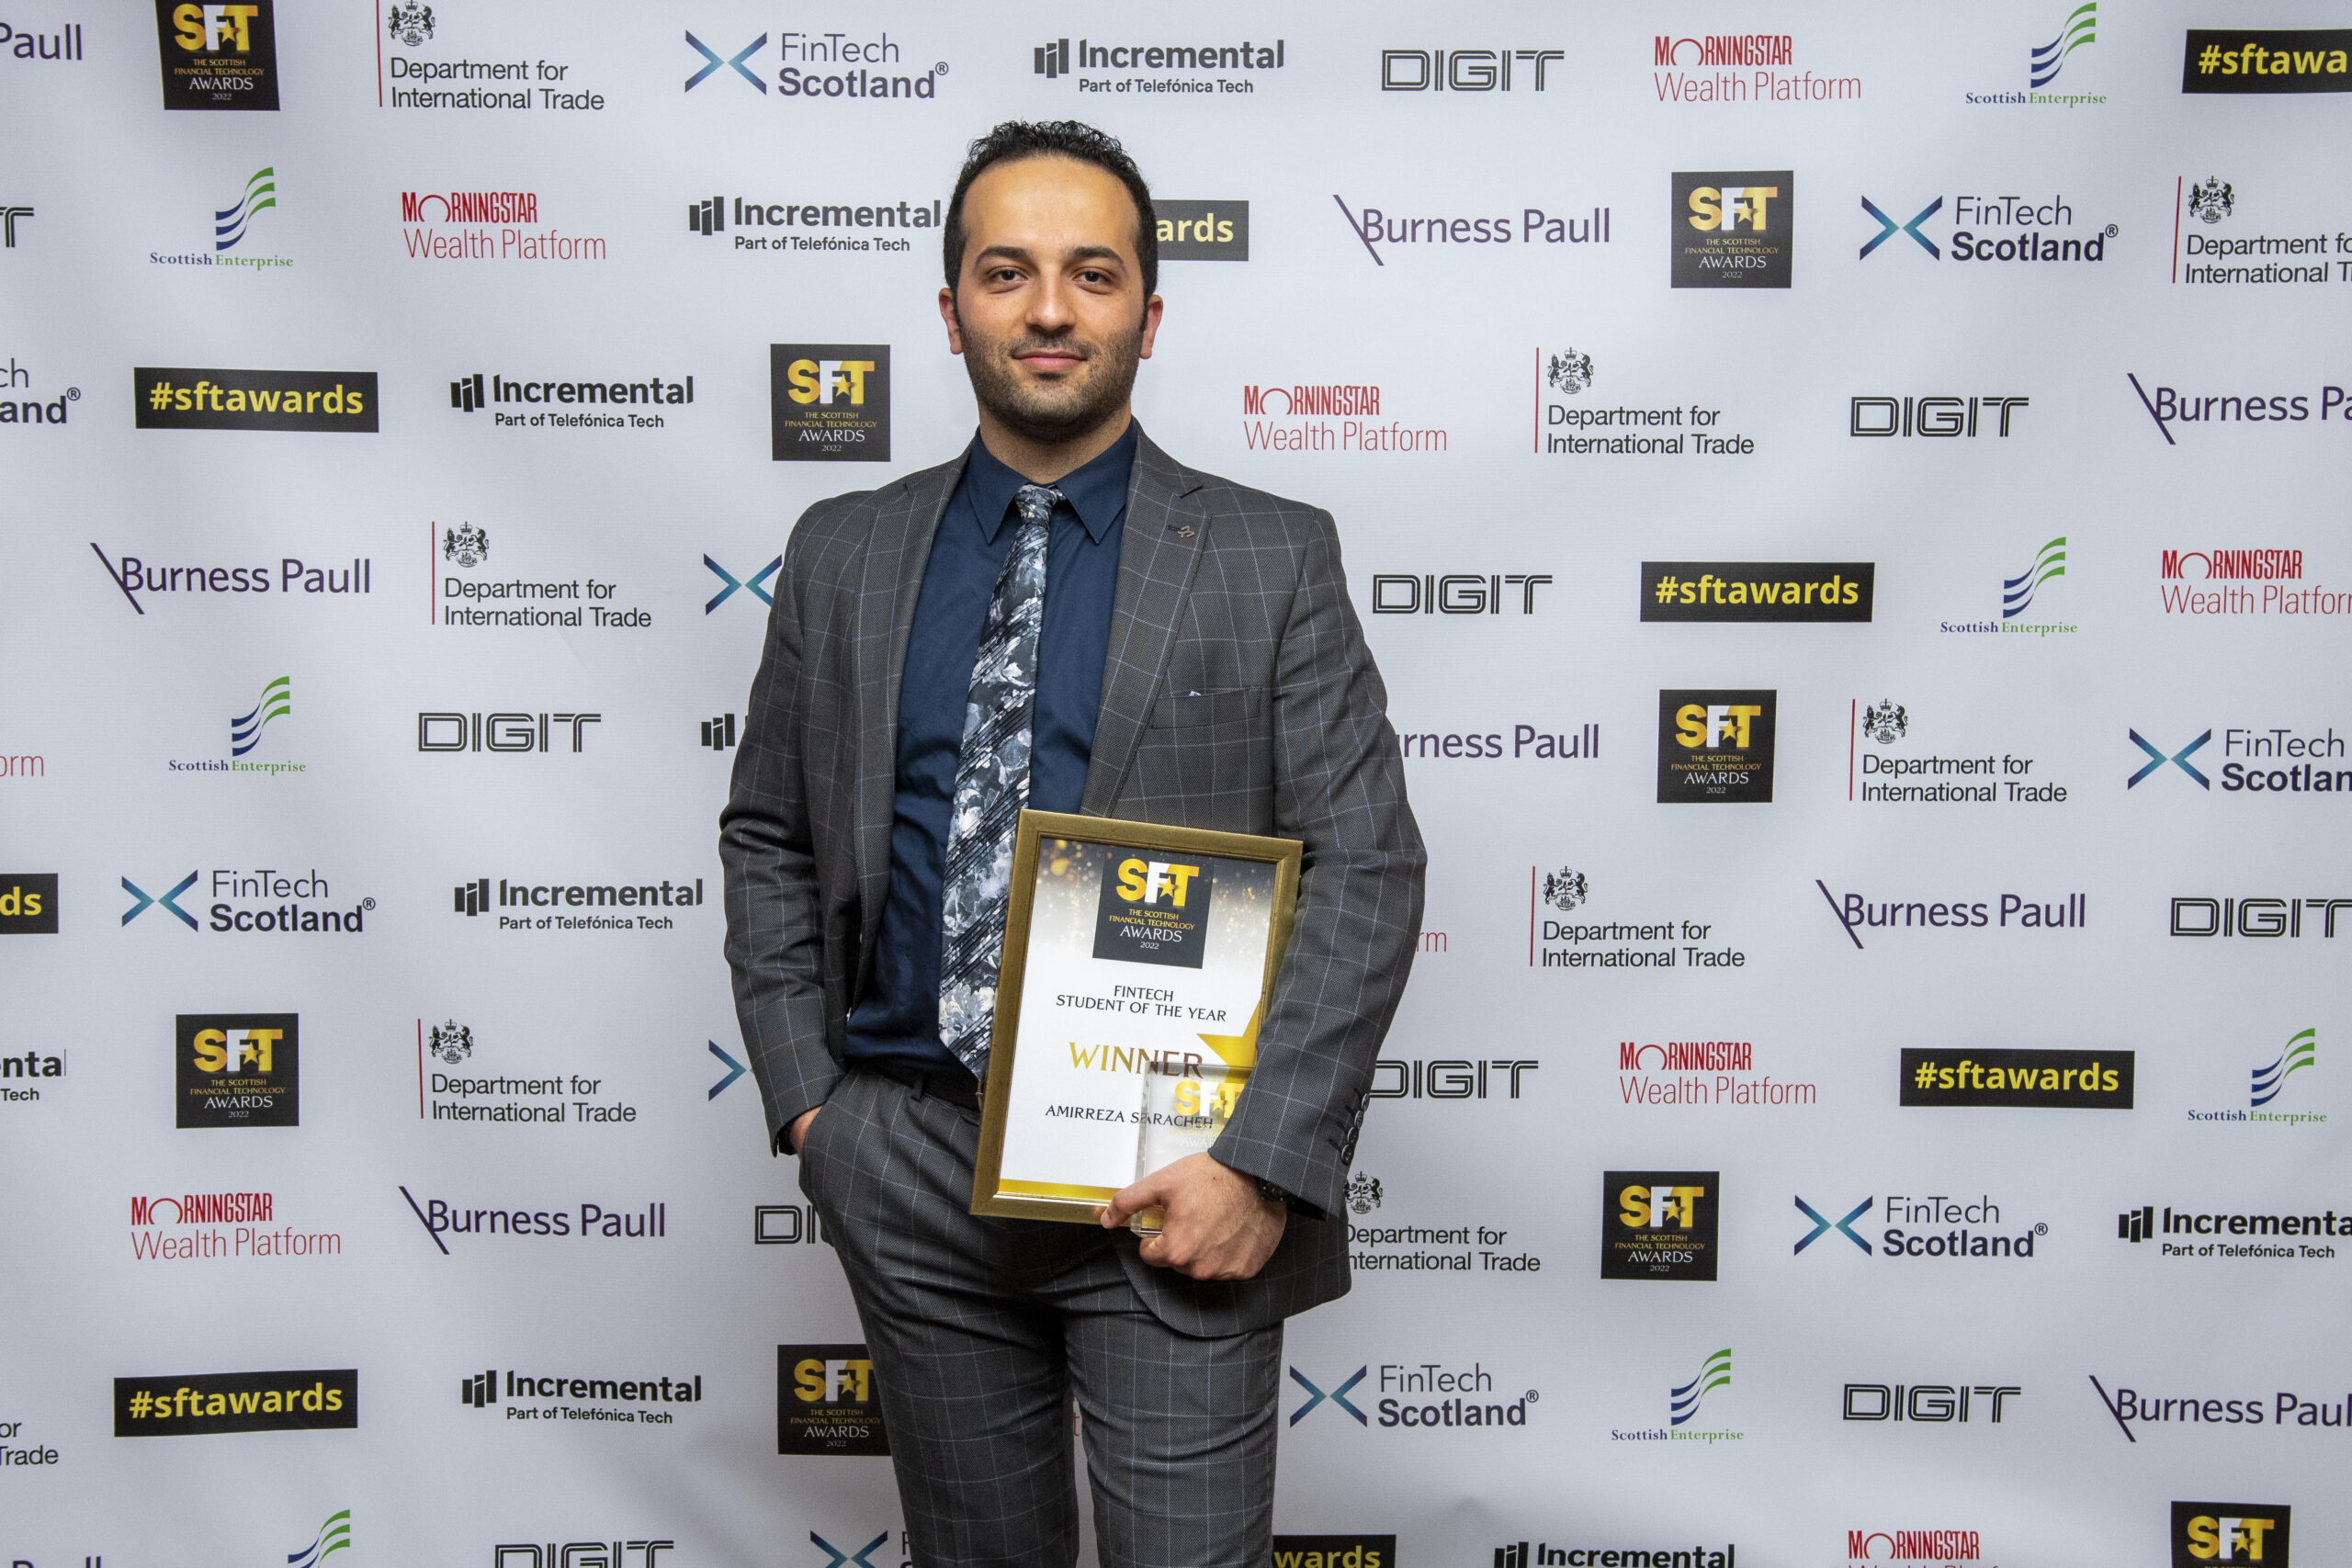 Amirreza Sarencheh wins “Best Fintech Student of the Year” award at DIGIT’s Scottish Financial Technology Awards